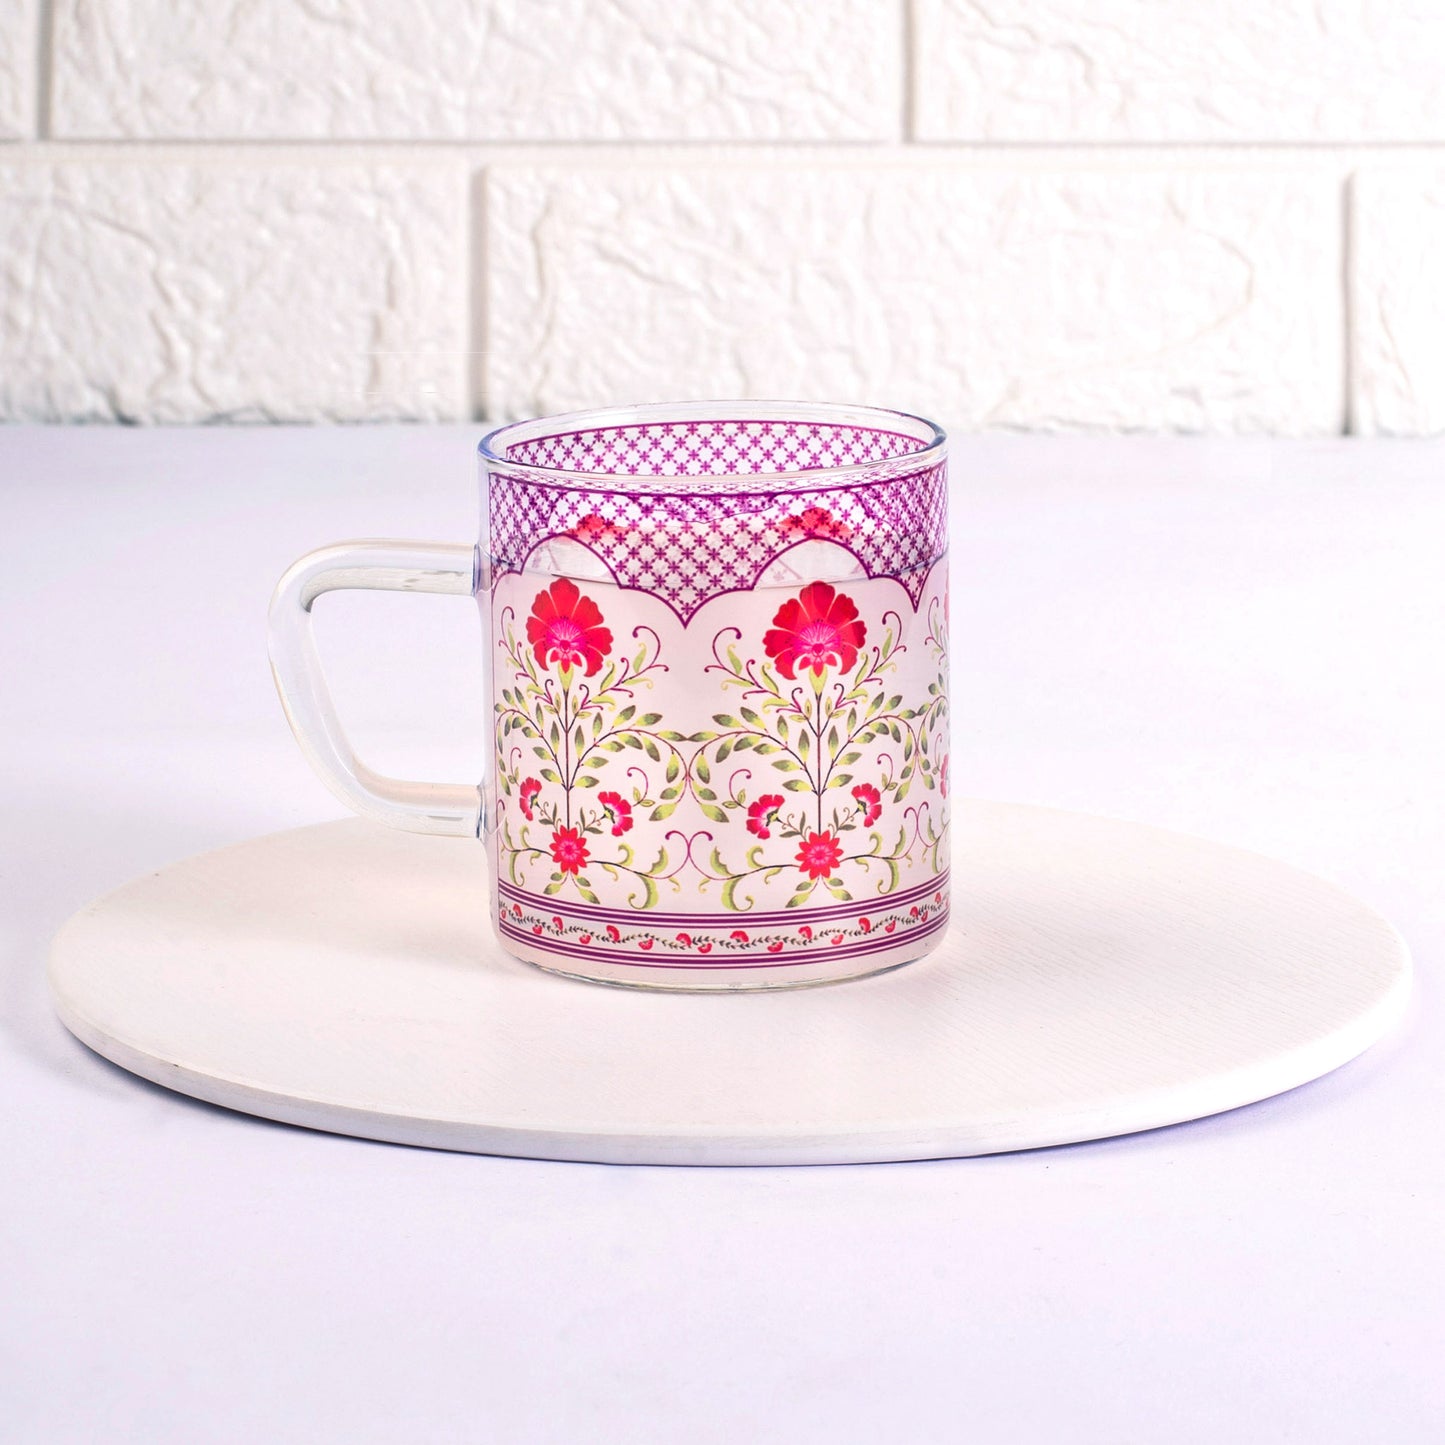 Floral Jali Print Tea cups - Set of 4 and 6